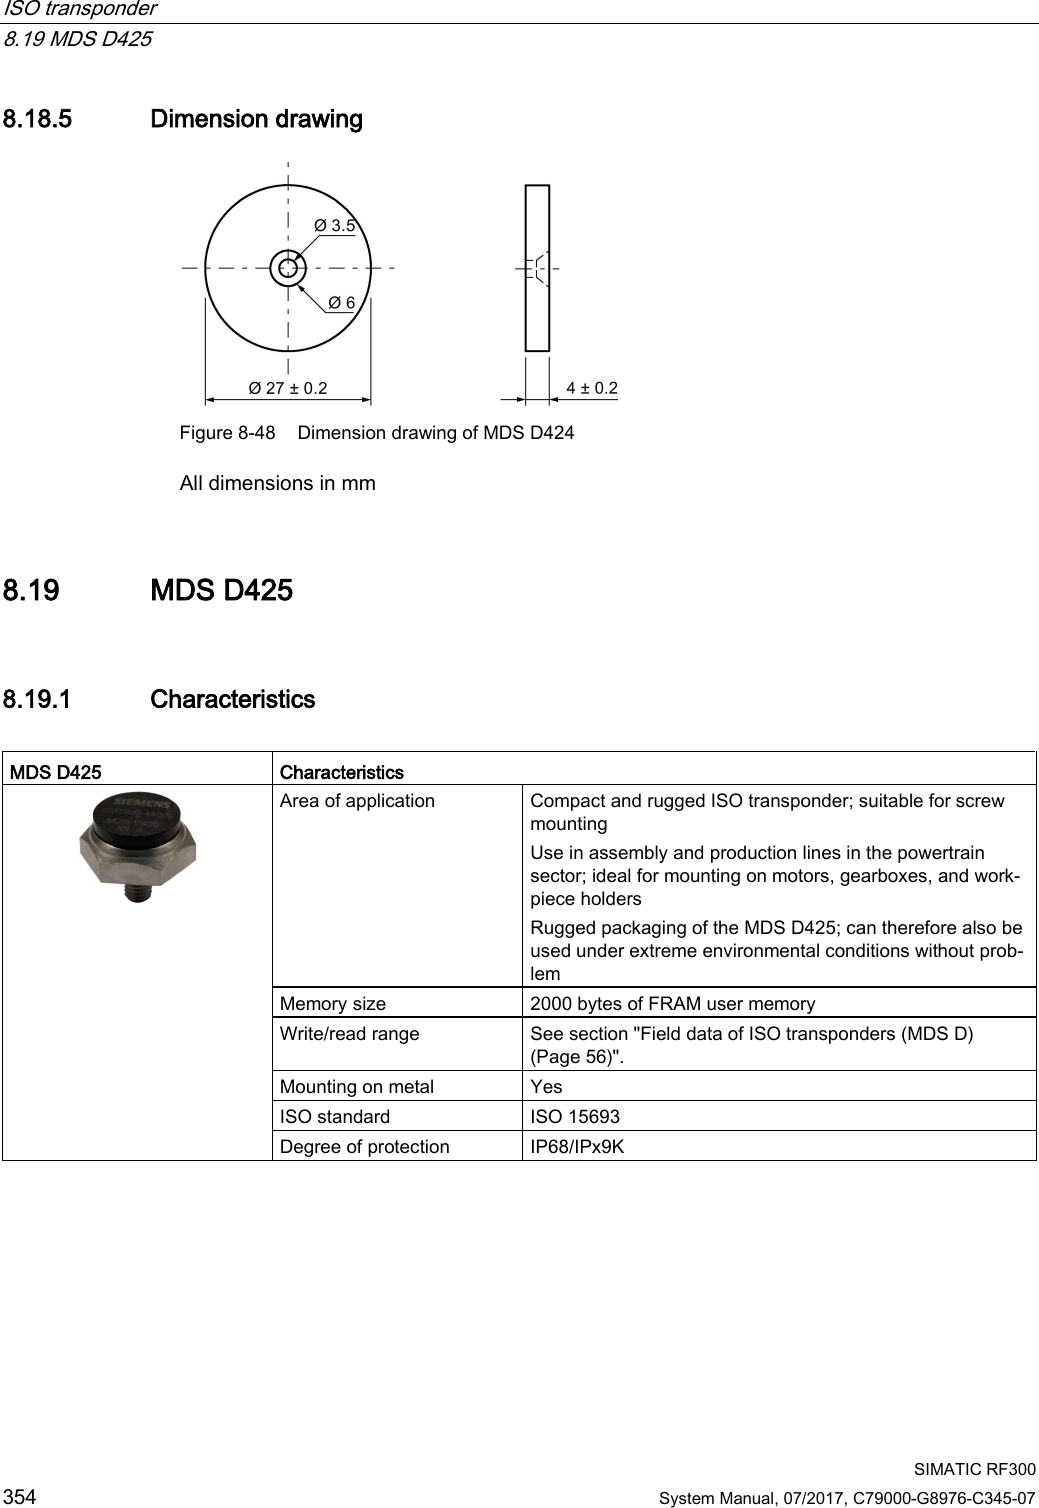 ISO transponder   8.19 MDS D425  SIMATIC RF300 354 System Manual, 07/2017, C79000-G8976-C345-07 8.18.5 Dimension drawing  Figure 8-48 Dimension drawing of MDS D424 All dimensions in mm 8.19 MDS D425 8.19.1 Characteristics  MDS D425 Characteristics  Area of application Compact and rugged ISO transponder; suitable for screw mounting Use in assembly and production lines in the powertrain sector; ideal for mounting on motors, gearboxes, and work-piece holders Rugged packaging of the MDS D425; can therefore also be used under extreme environmental conditions without prob-lem Memory size 2000 bytes of FRAM user memory Write/read range See section &quot;Field data of ISO transponders (MDS D) (Page 56)&quot;. Mounting on metal Yes ISO standard ISO 15693 Degree of protection IP68/IPx9K   